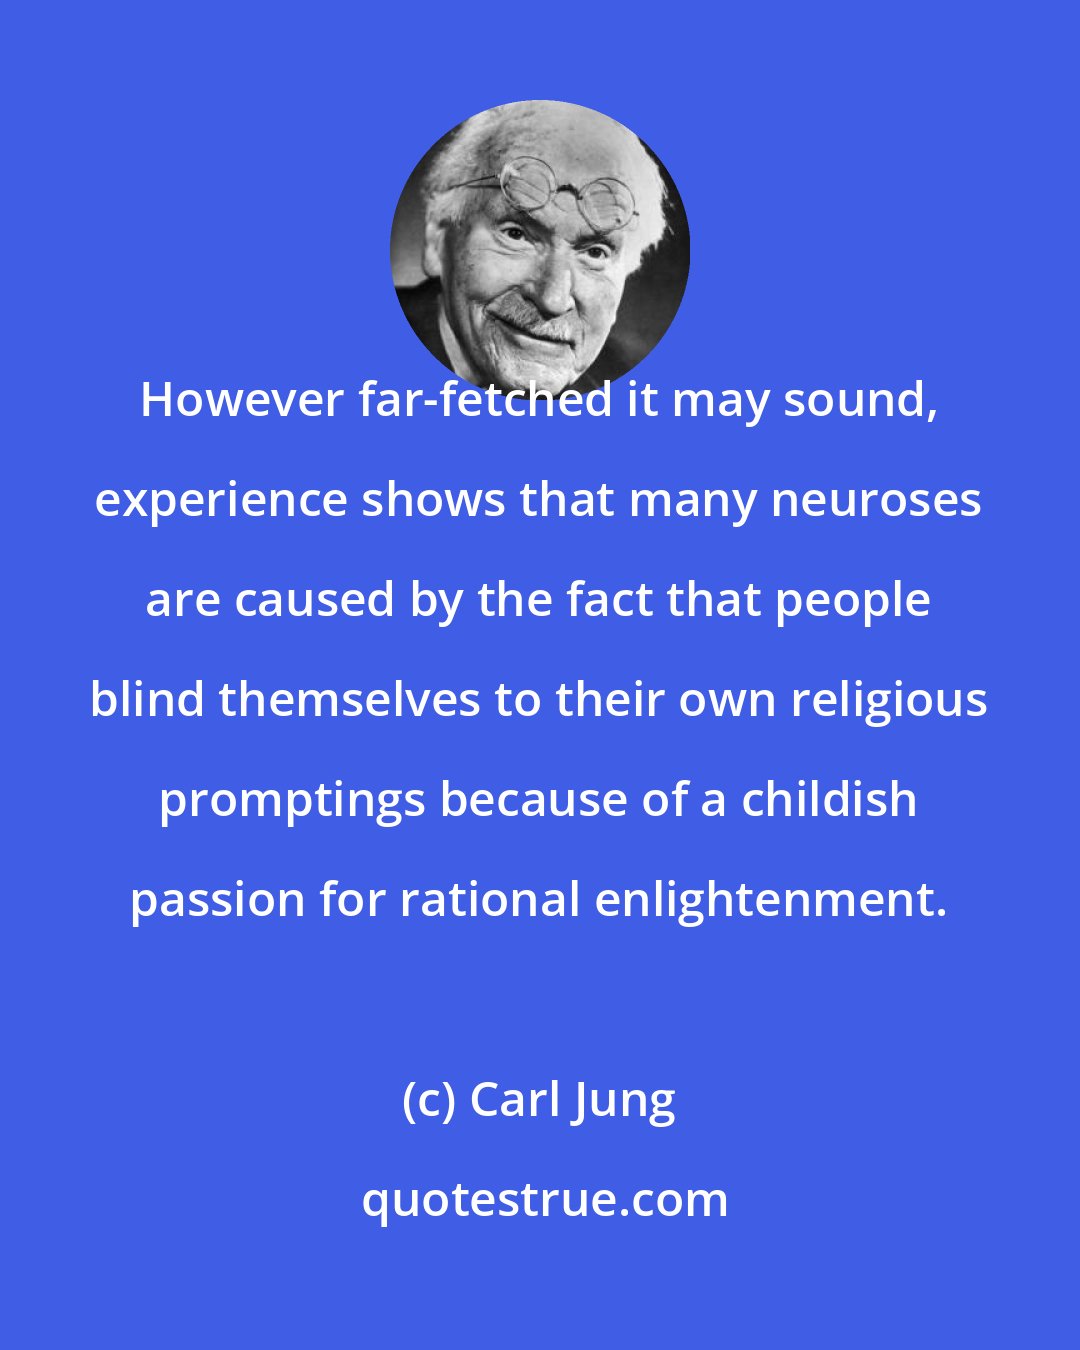 Carl Jung: However far-fetched it may sound, experience shows that many neuroses are caused by the fact that people blind themselves to their own religious promptings because of a childish passion for rational enlightenment.